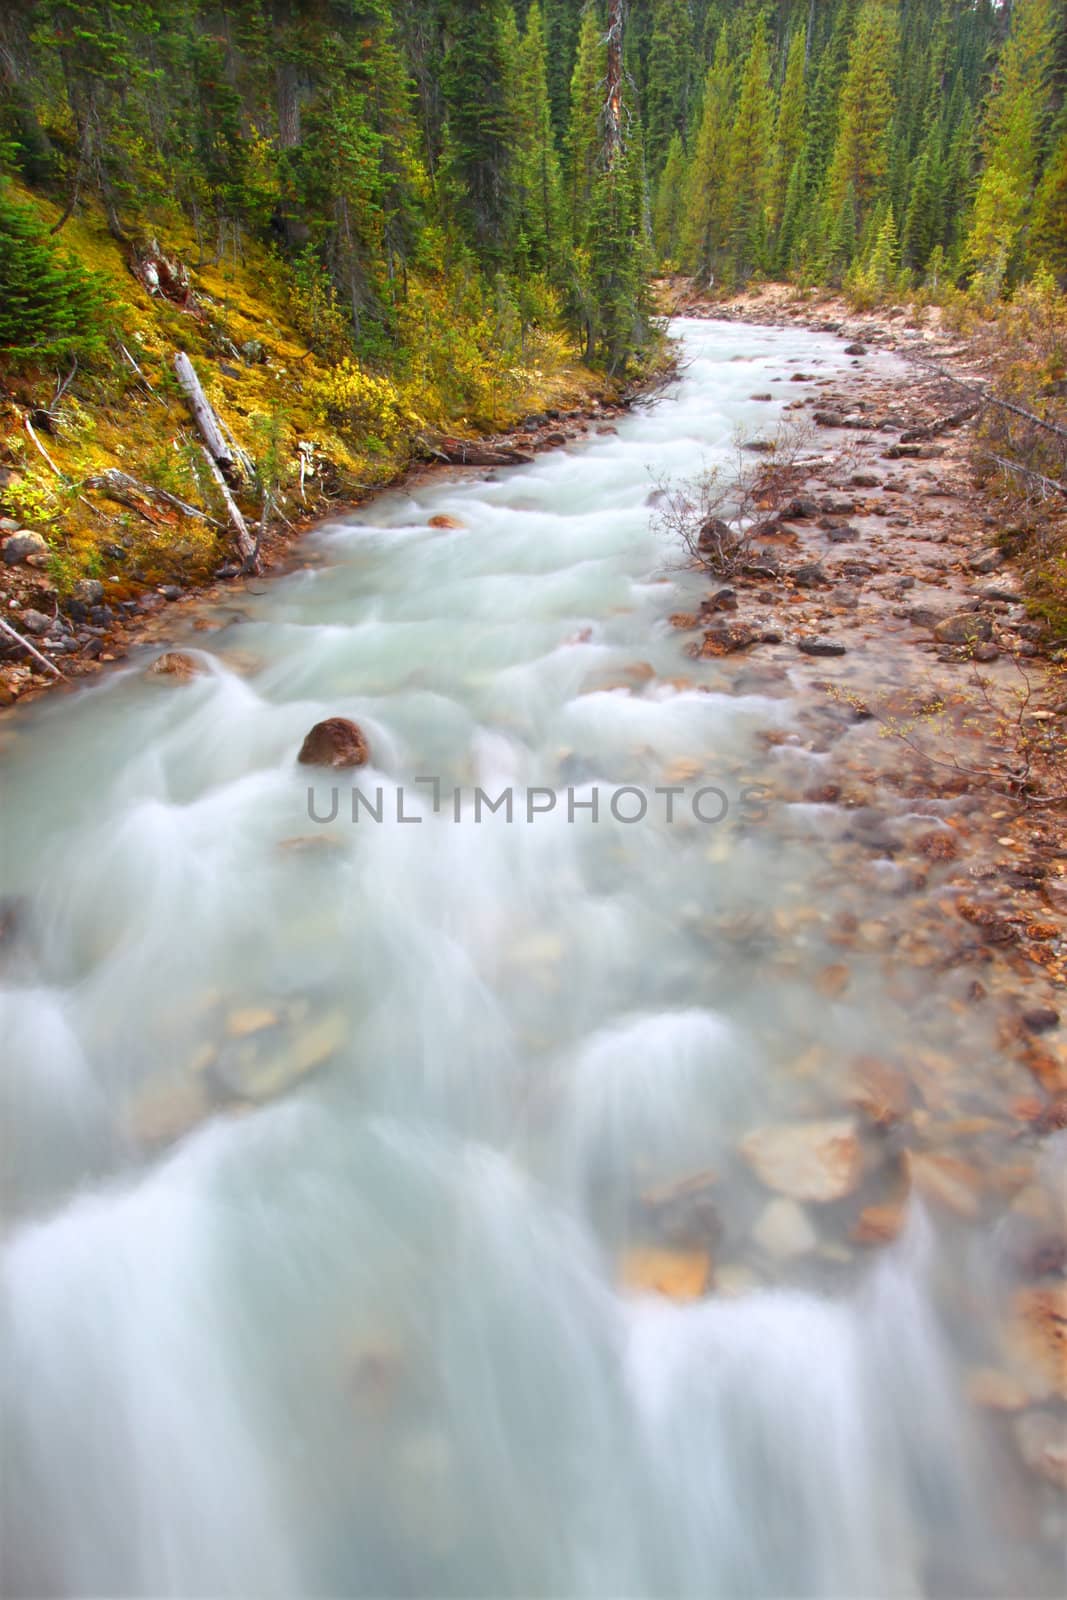 Rapids of the Little Yoho River in Yoho National Park of Canada.